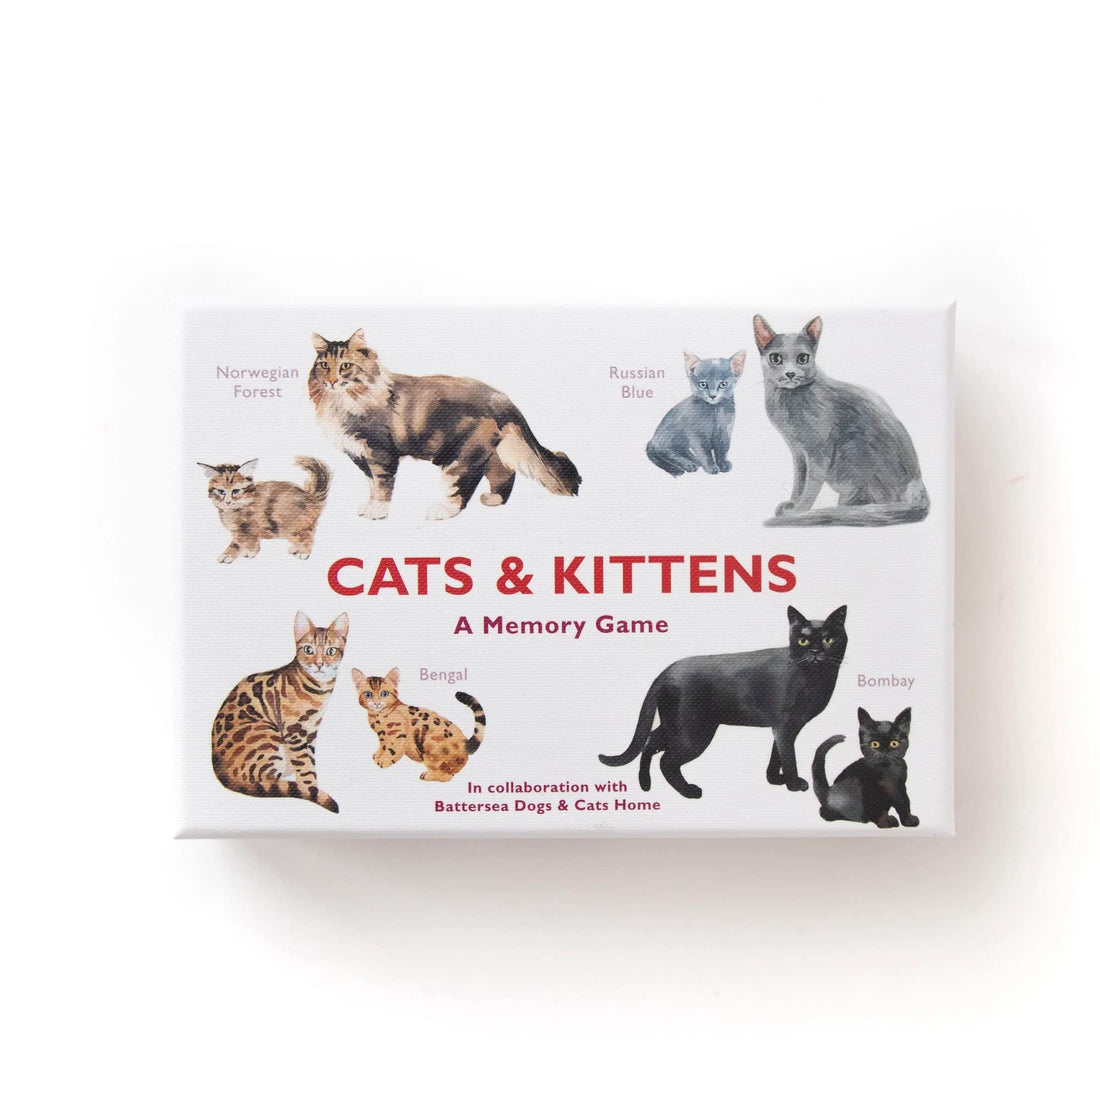 A memory game titled &quot;Cats &amp; Kittens: A Memory Game&quot; featuring illustrations of various cat breeds such as Norwegian Forest, Russian Blue, Bengal, and Bombay. This educational game is designed to enhance memory skills while introducing players.
Brand Name: Chronicle Books